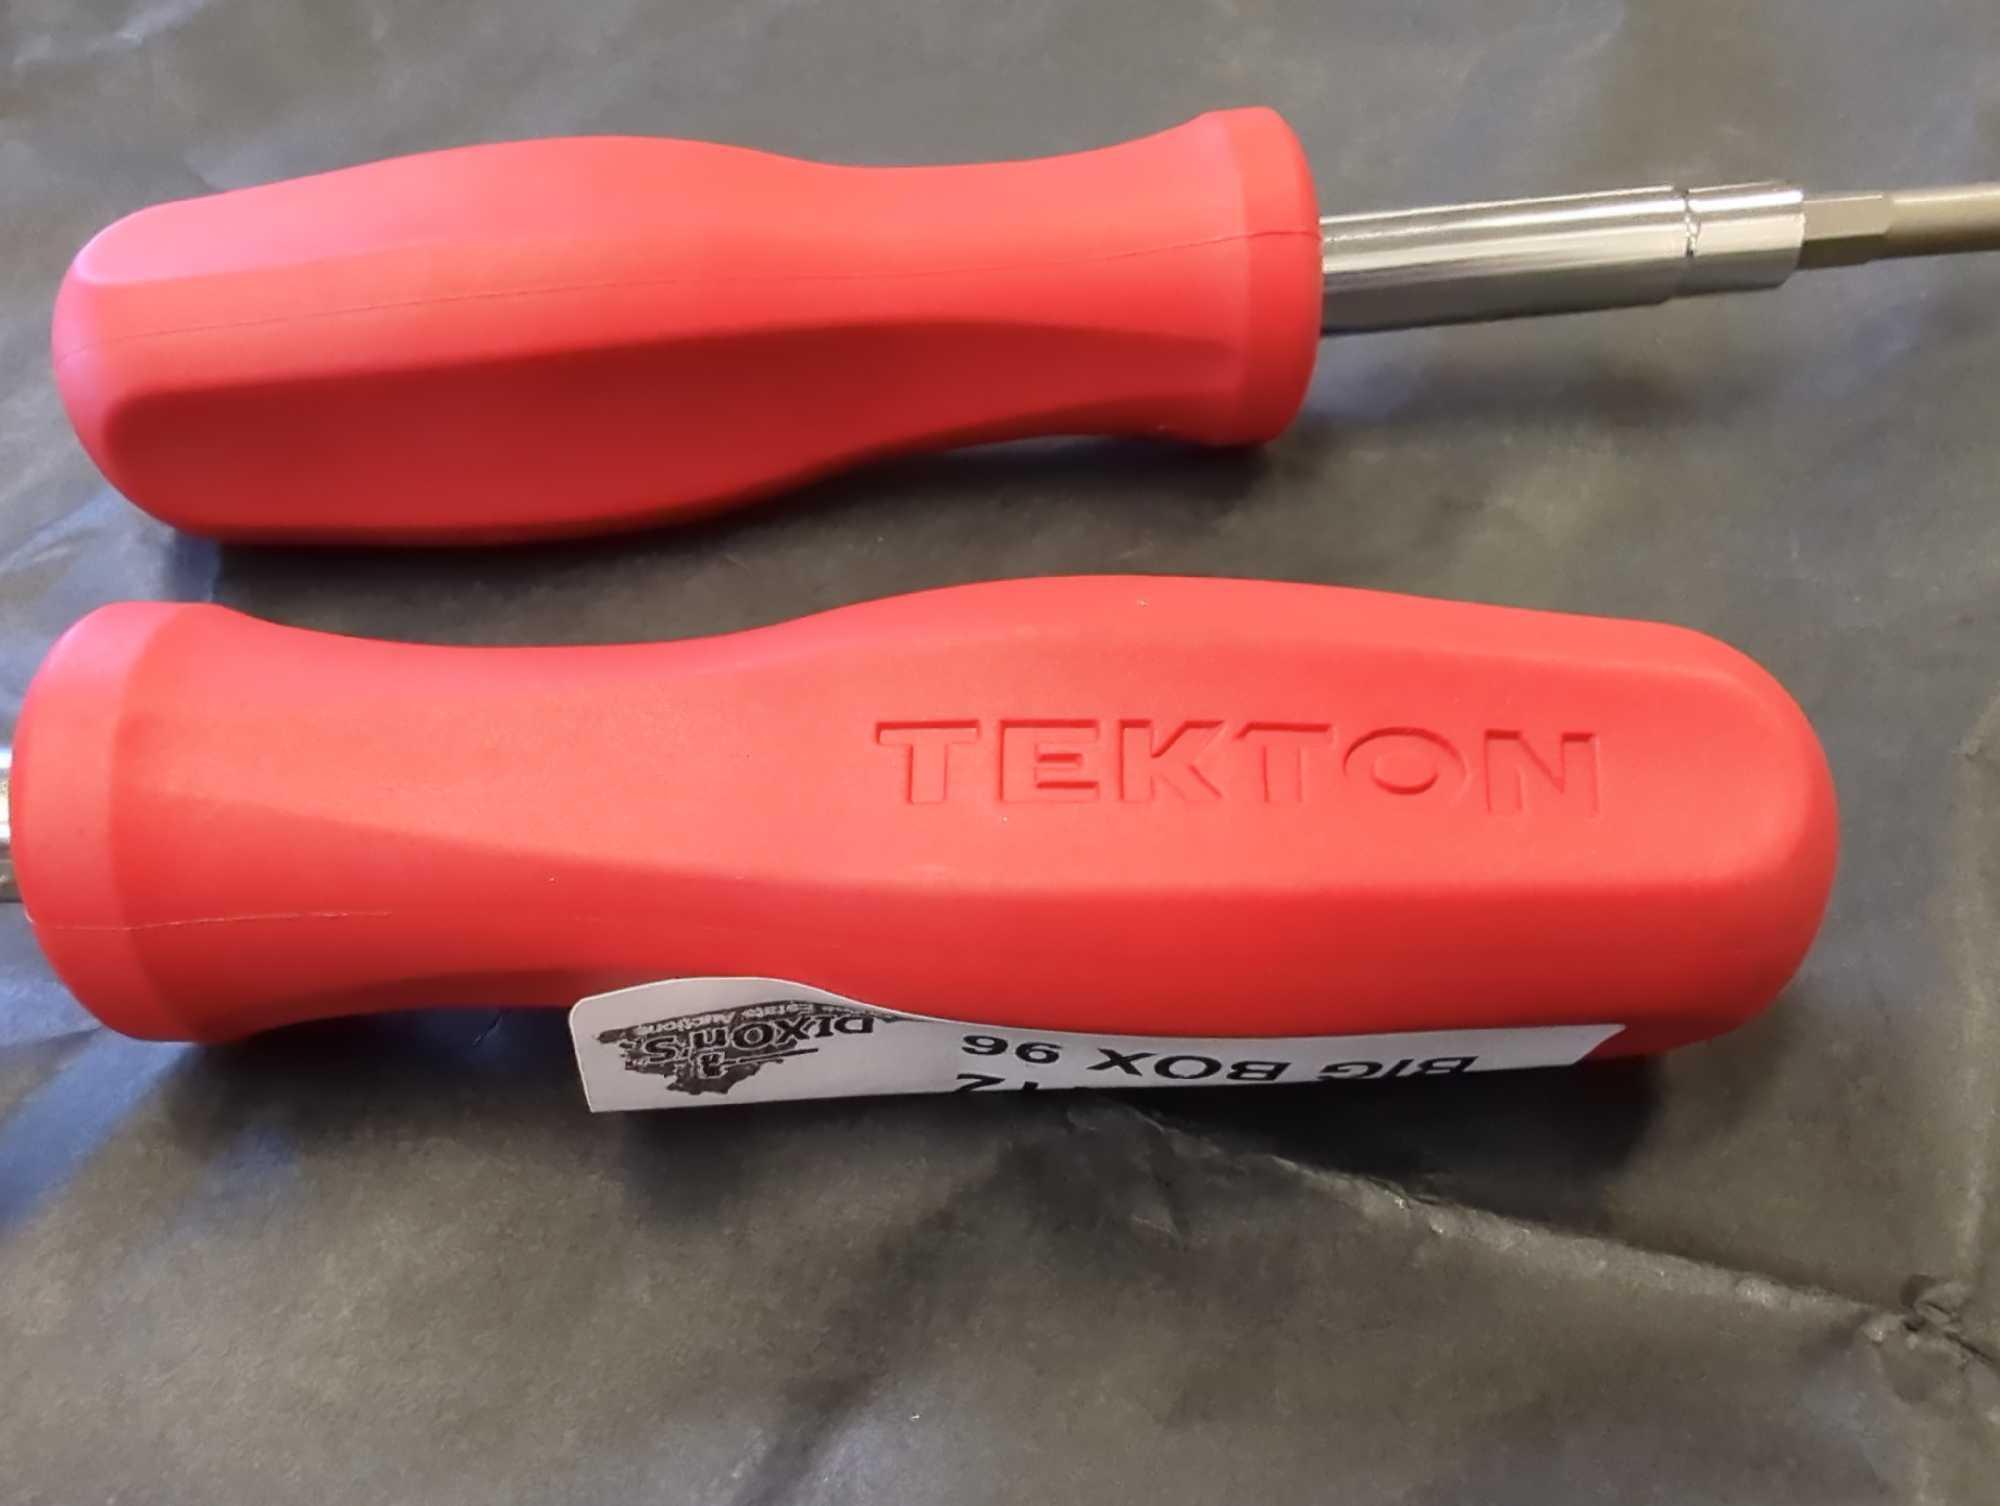 Lot of 2 TEKTON 6-in-1 Slotted Drivers (3/16 in., 1/4 in., 1/8 in., & 5/16 in.) Comes as is shown in